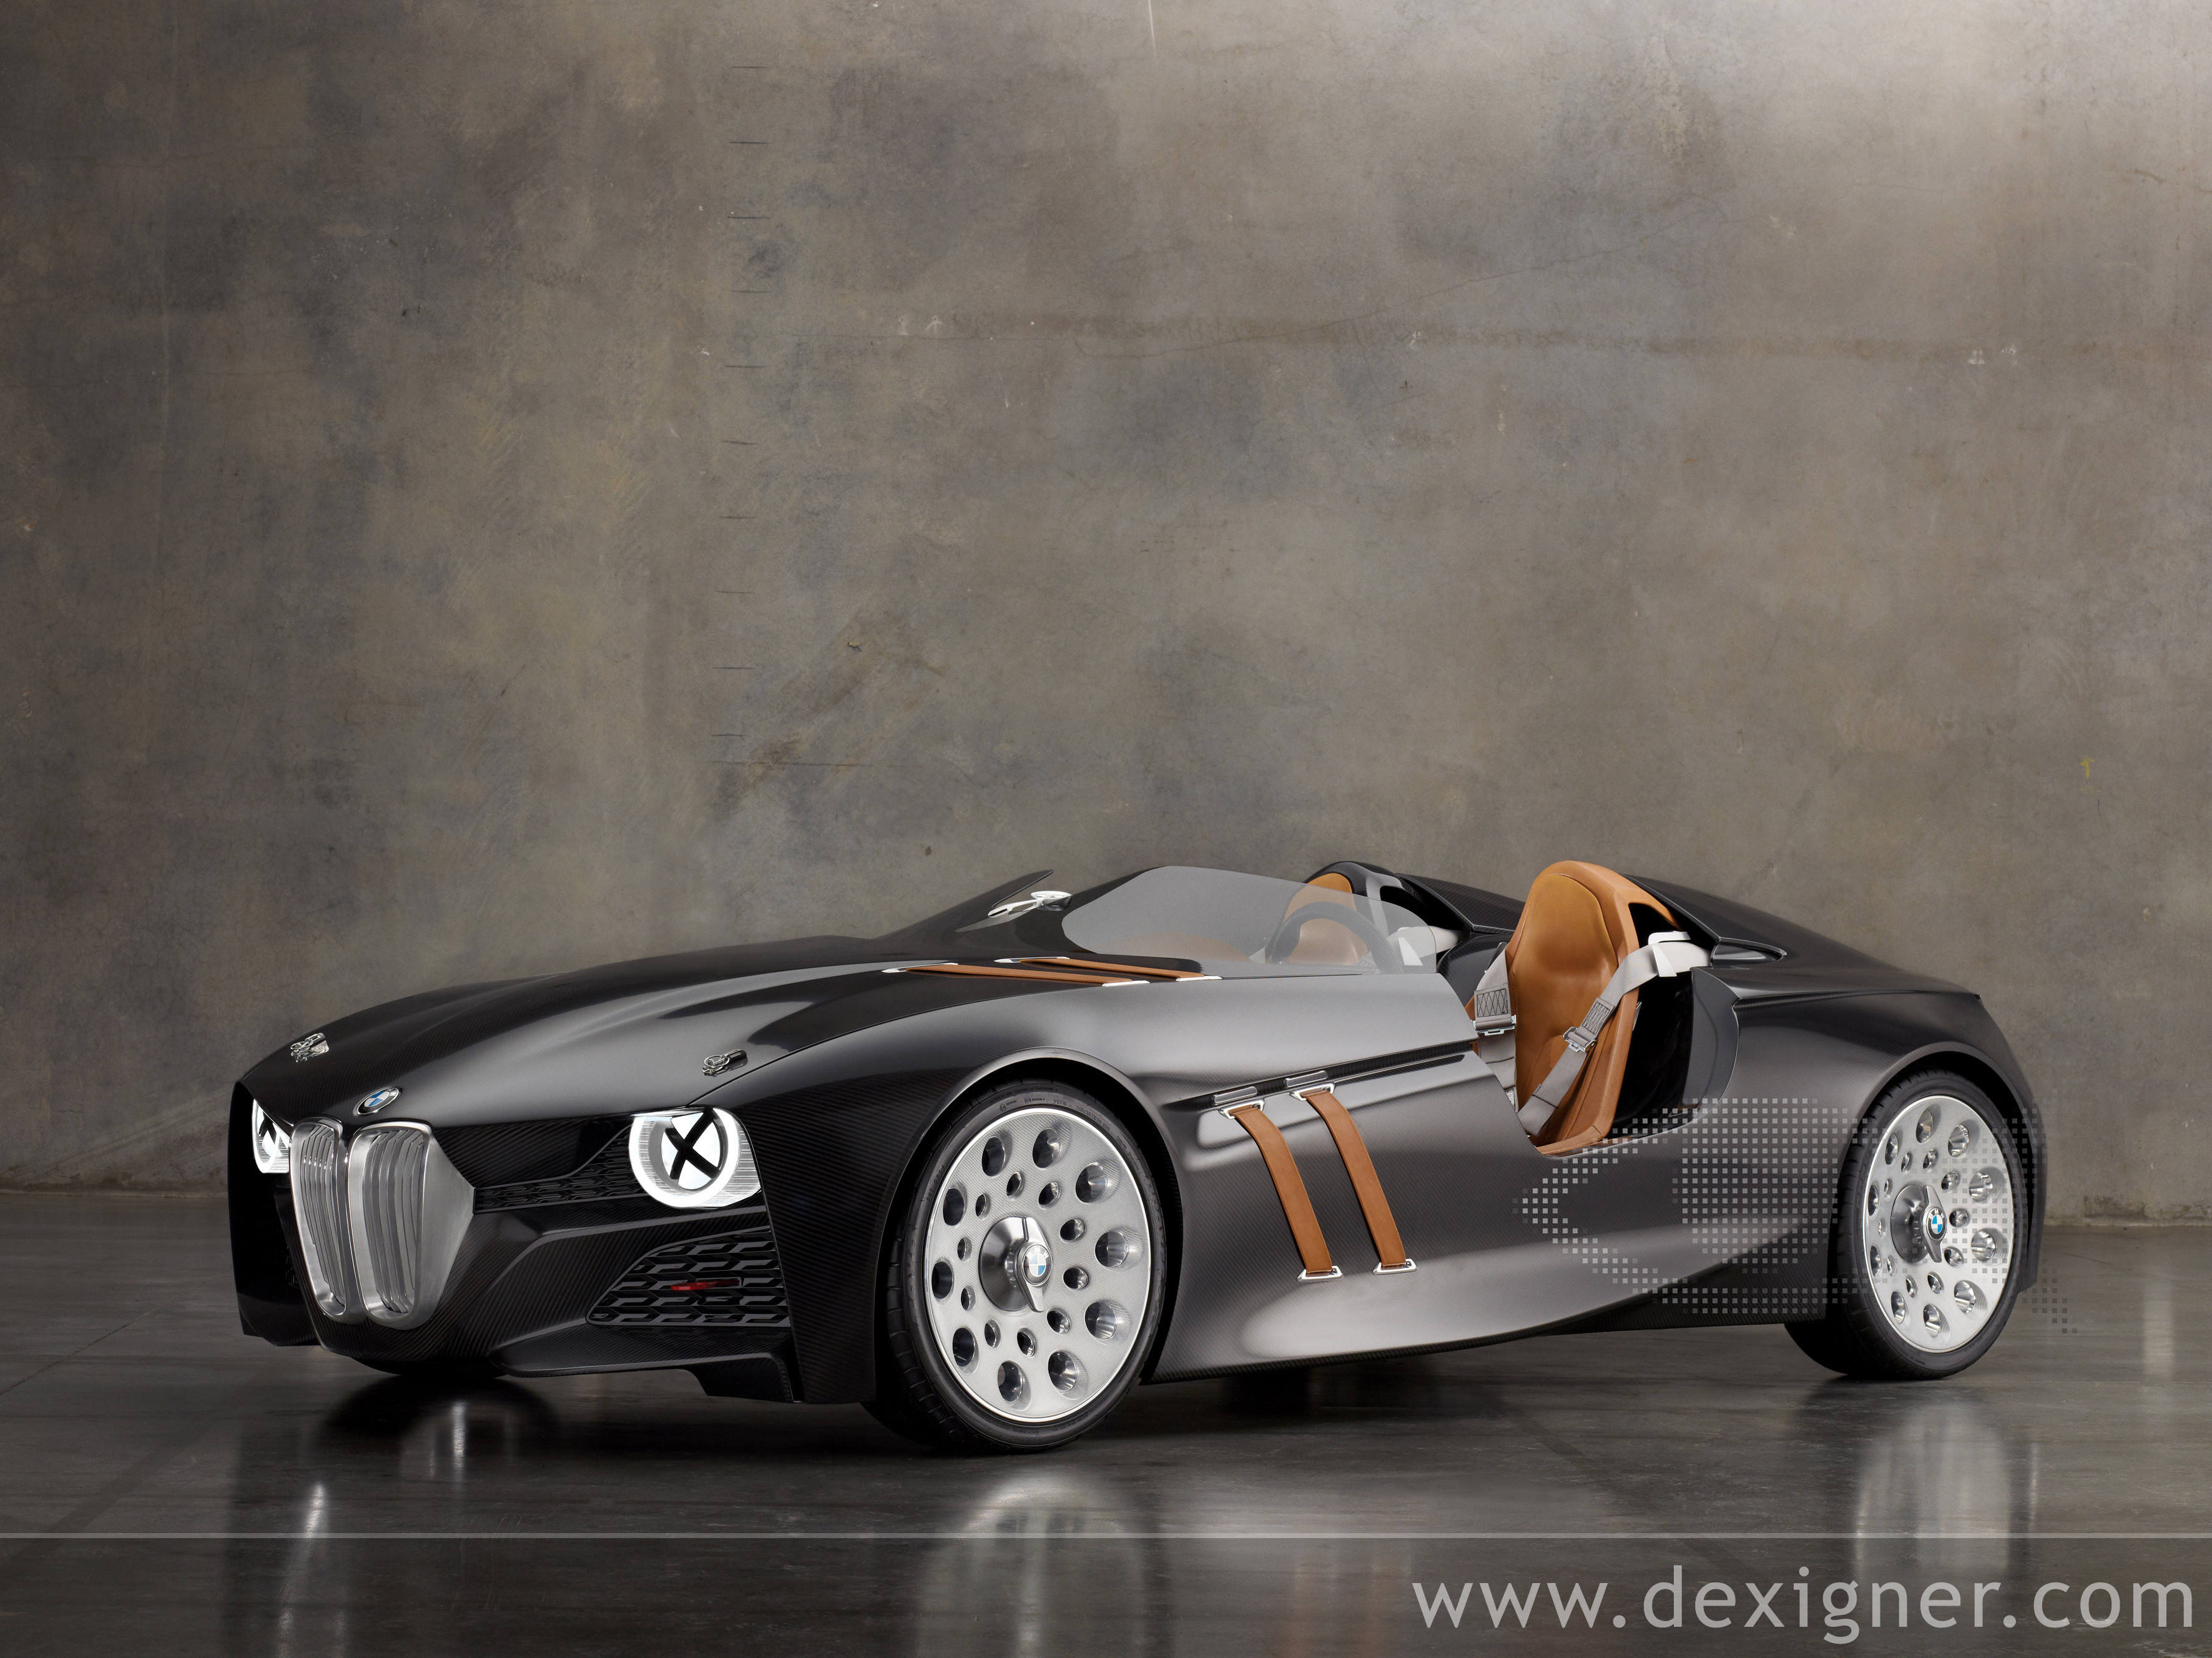 "With the BMW 328 Hommage, we wish to pay homage to the passion and